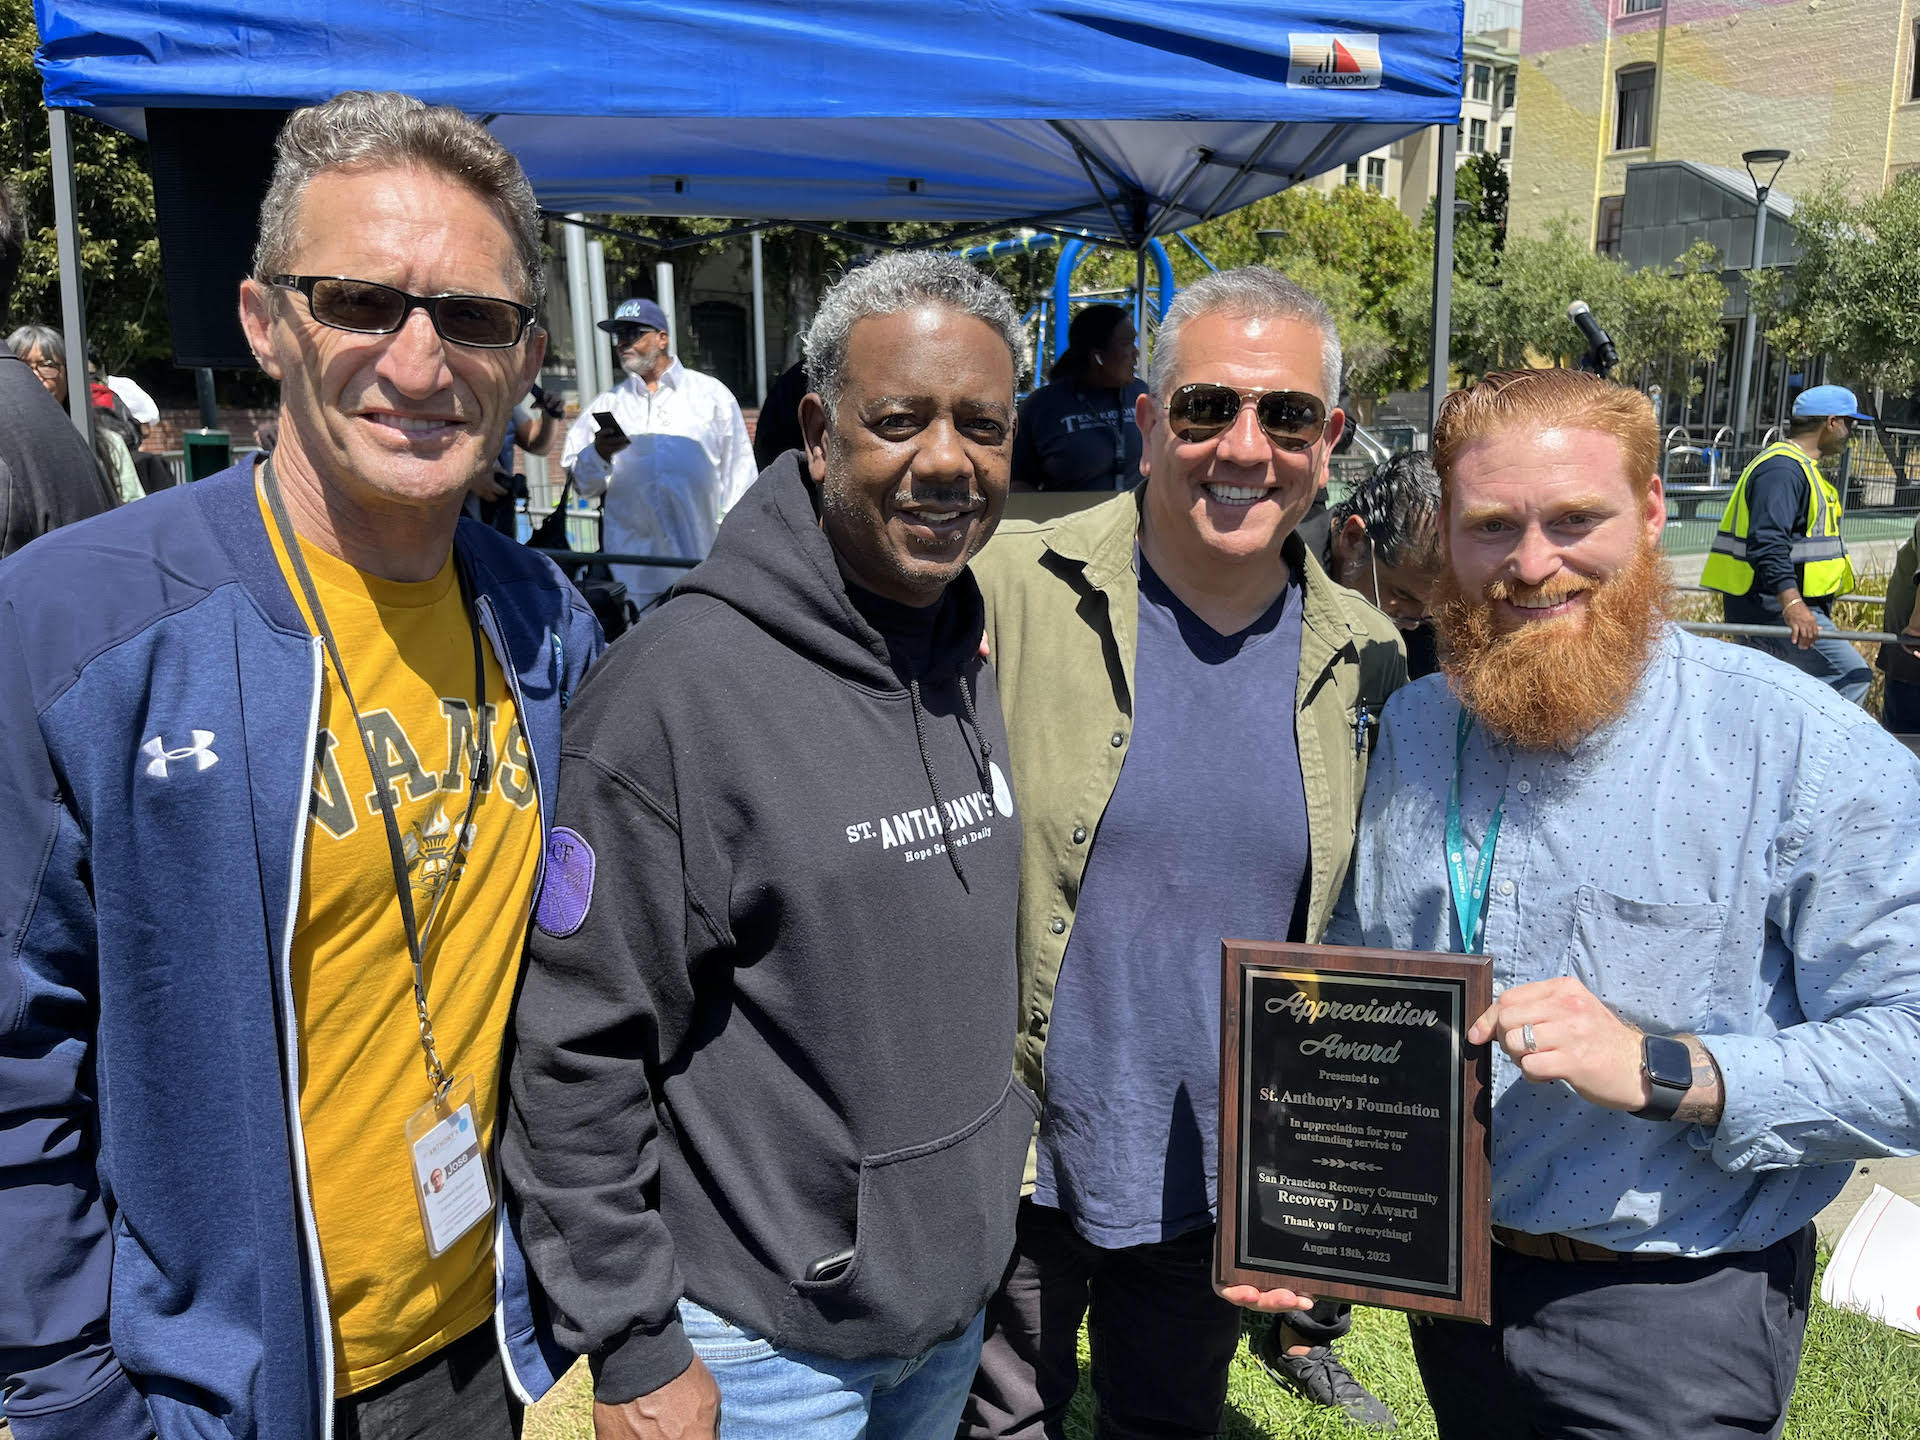 St. Anthony Foundation’s Father Alfred Center Honored at the 3rd Annual Recovery Day